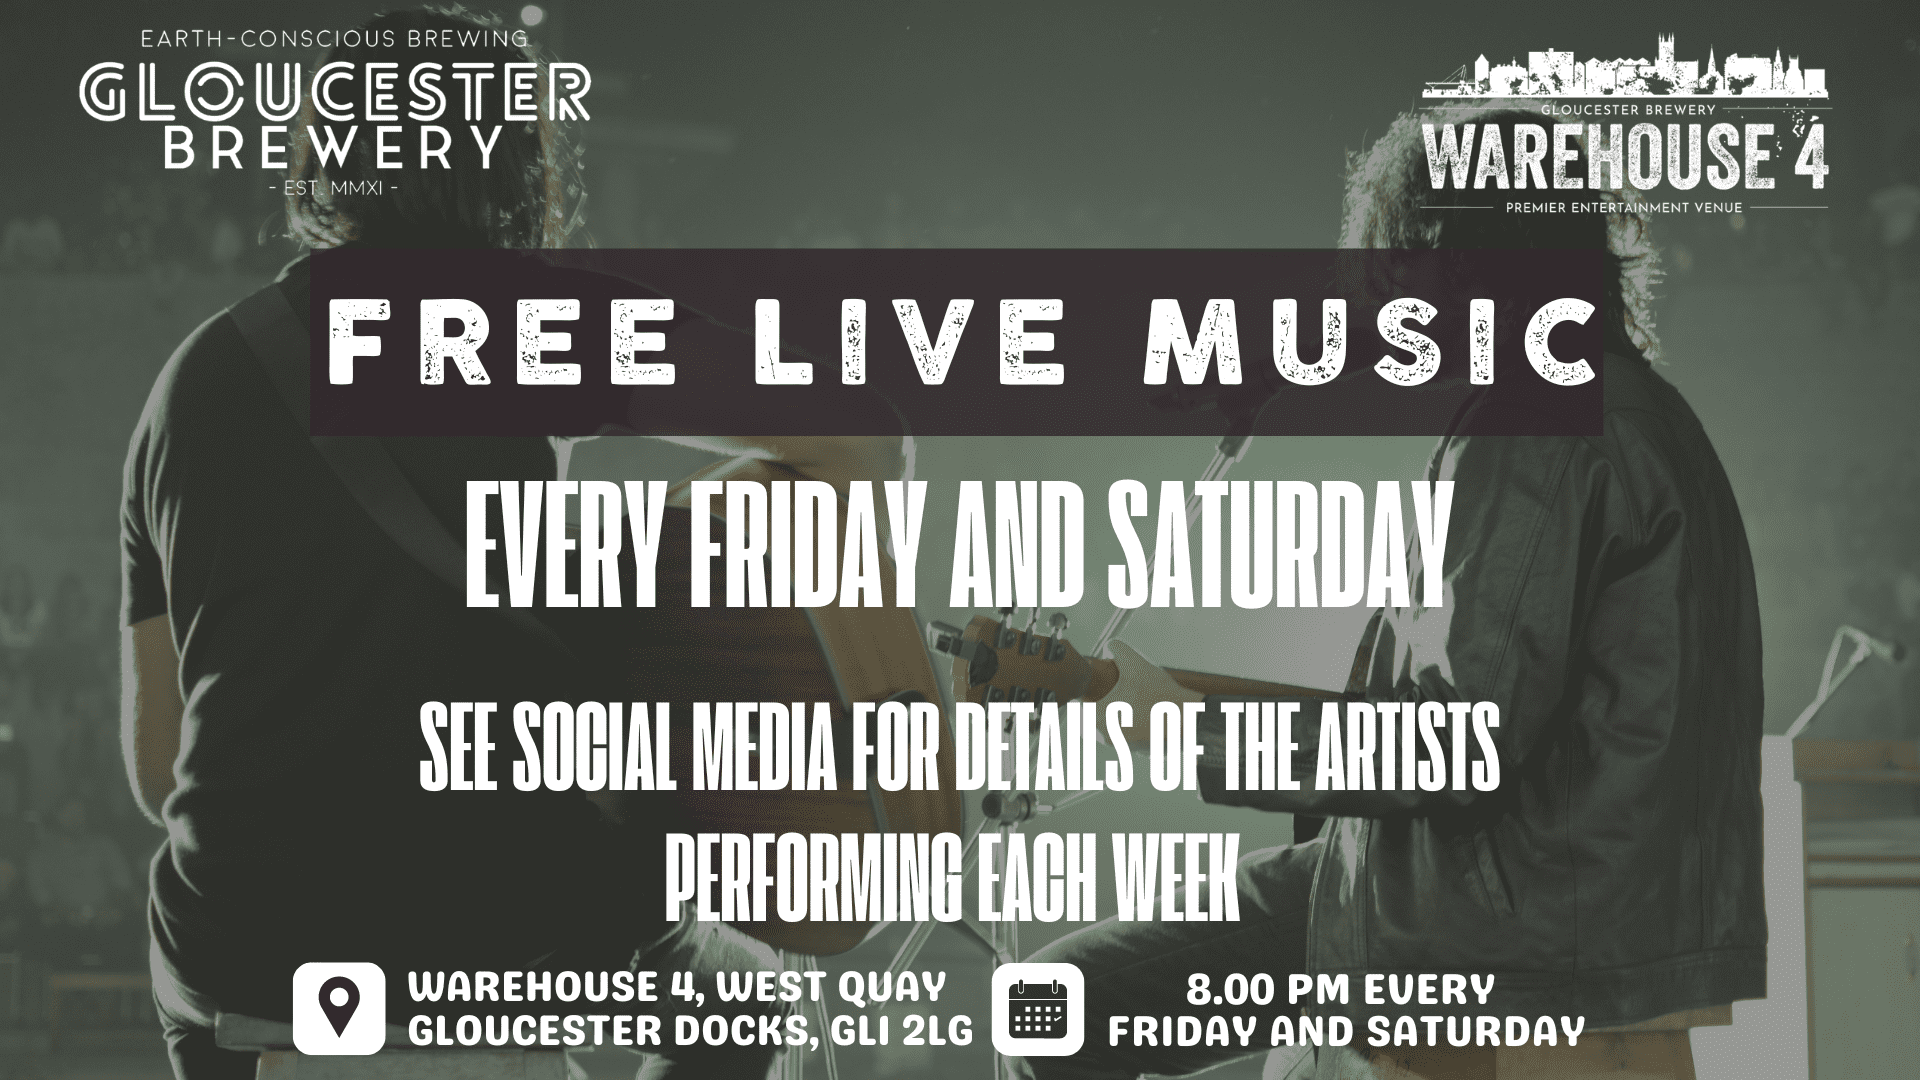 Free live music each Friday and Saturday at Gloucester Brewery's Warehouse 4 taproom